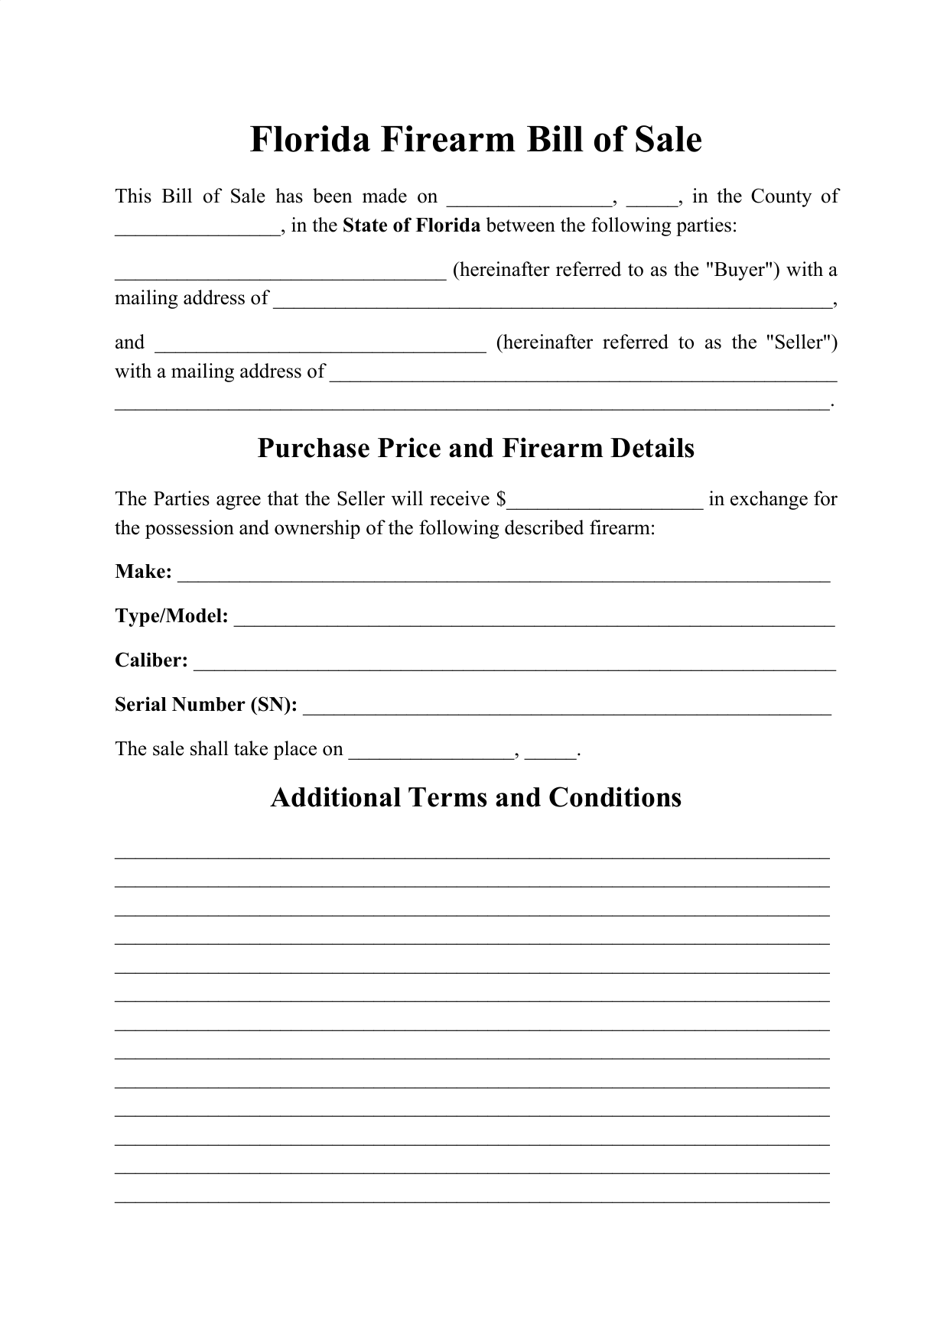 florida-firearm-bill-of-sale-form-fill-out-sign-online-and-download-pdf-templateroller